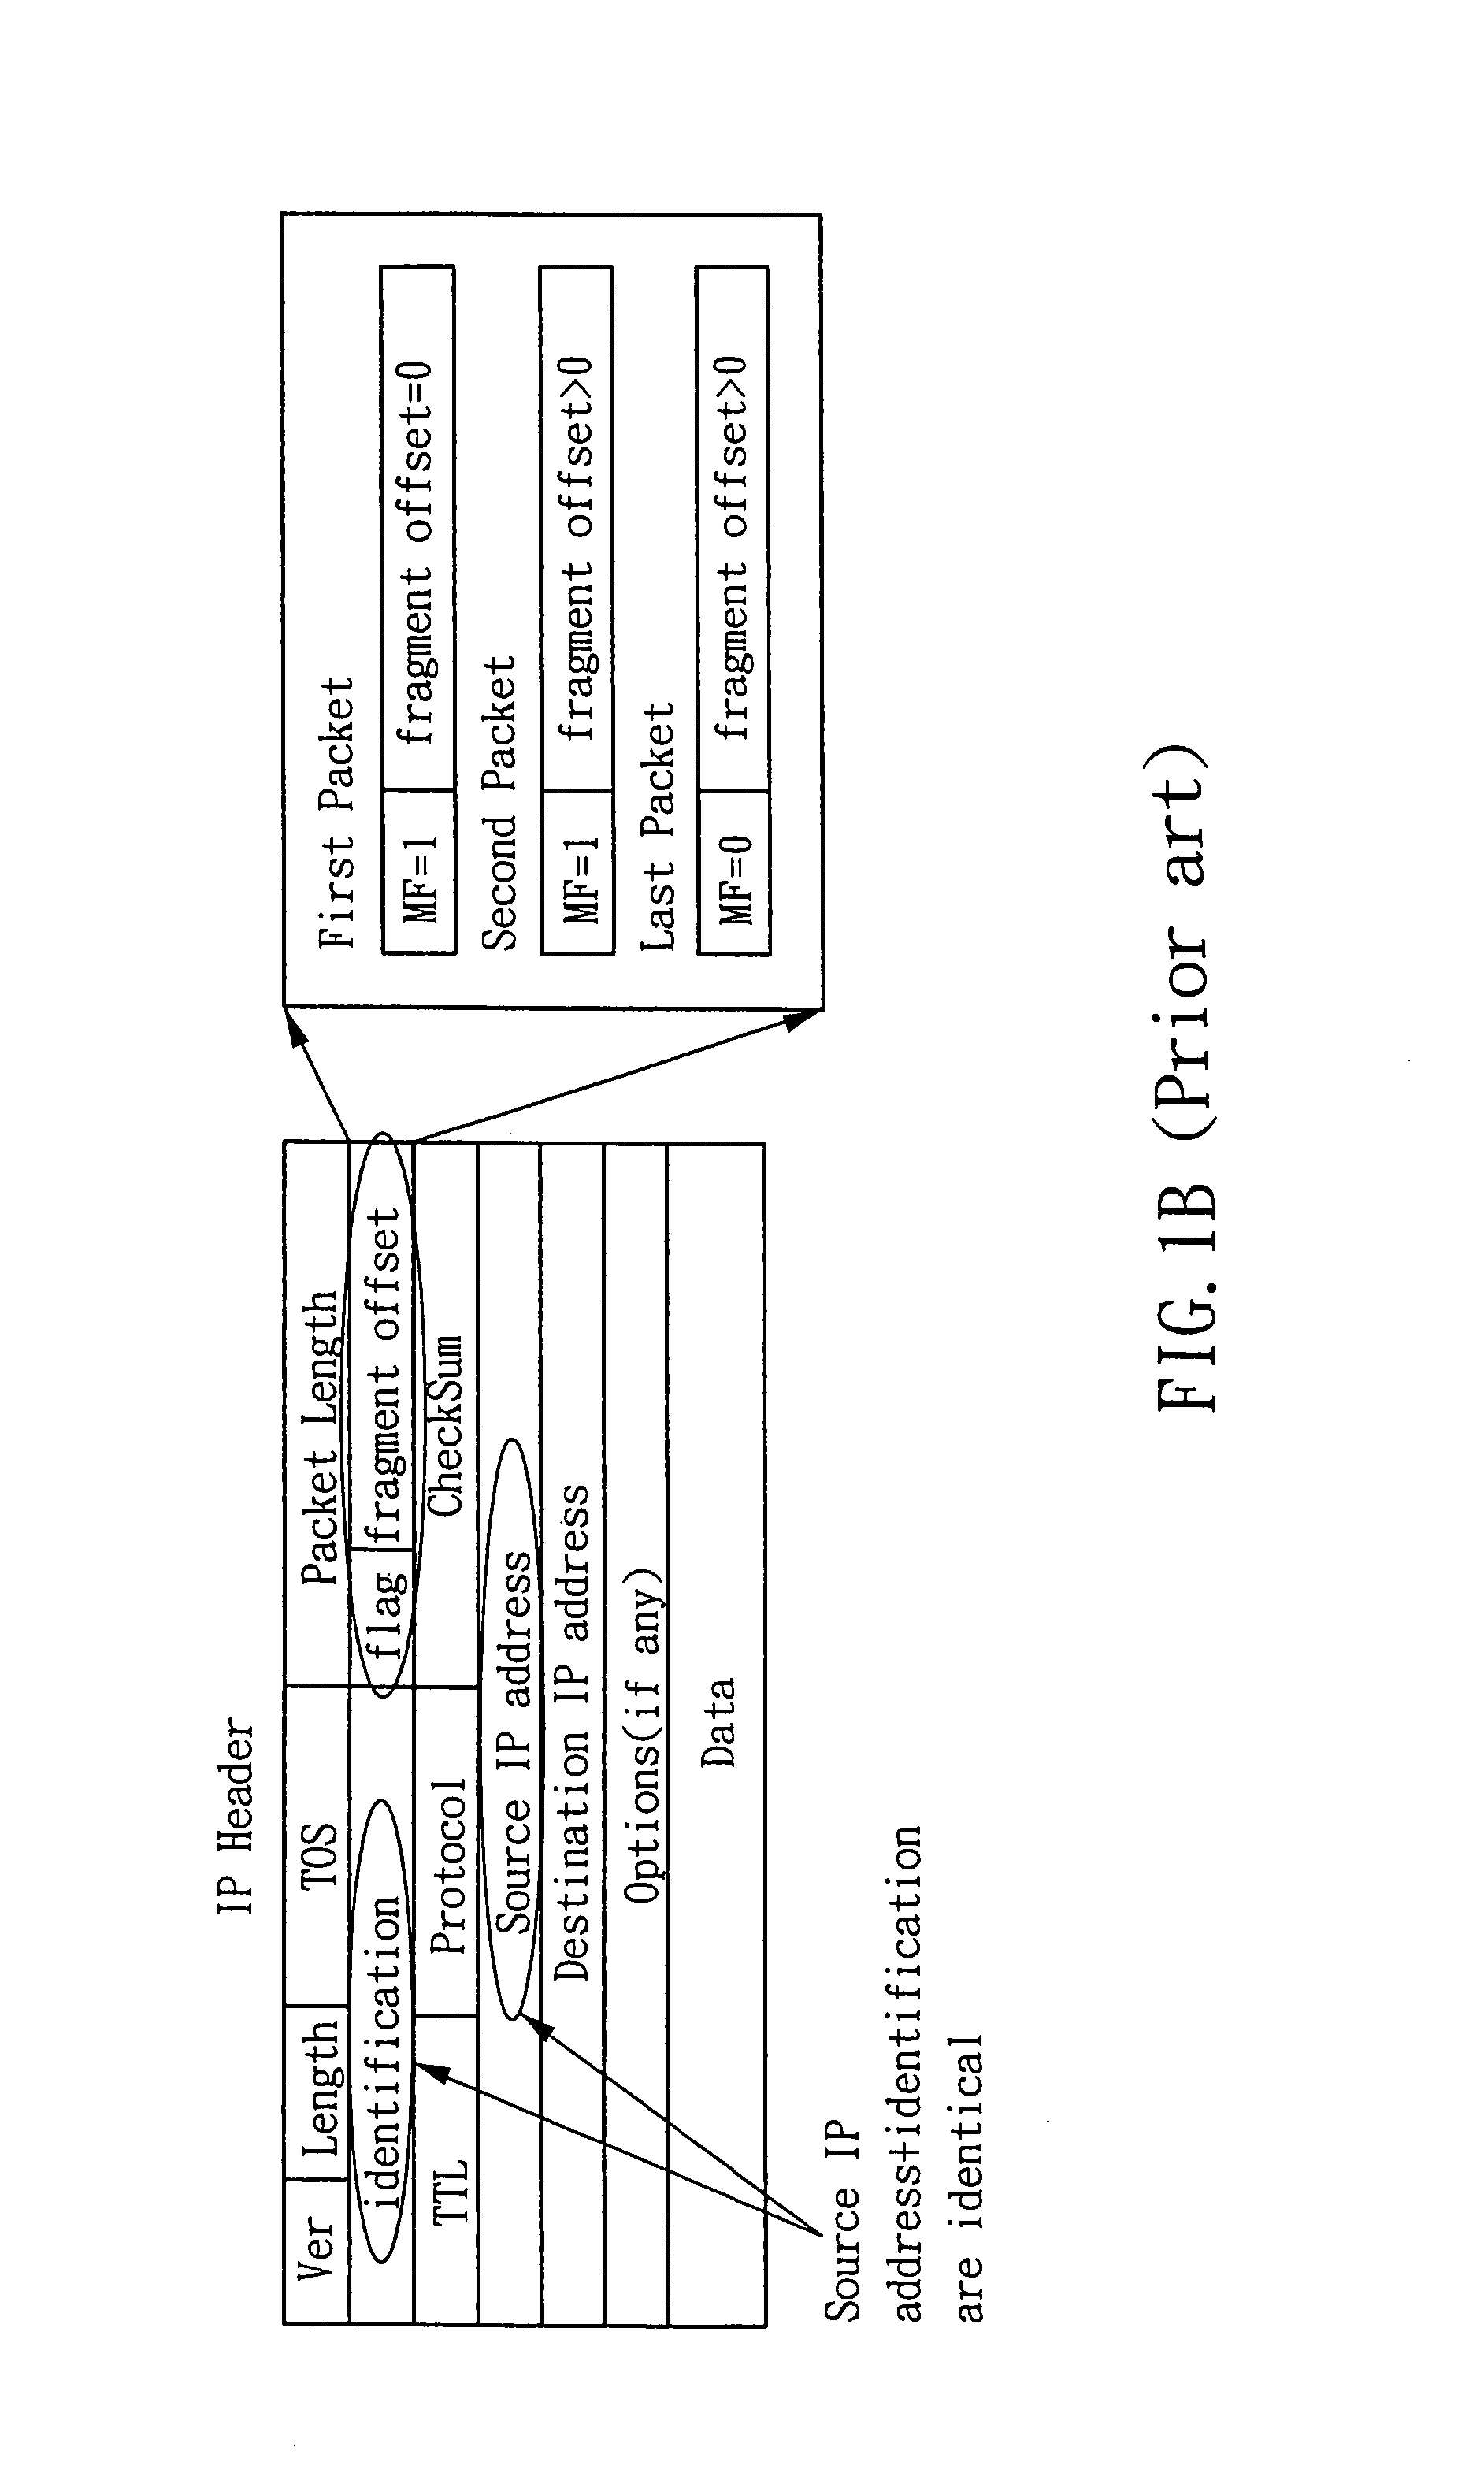 QoS router system for effectively processing fragmented IP packets and method thereof